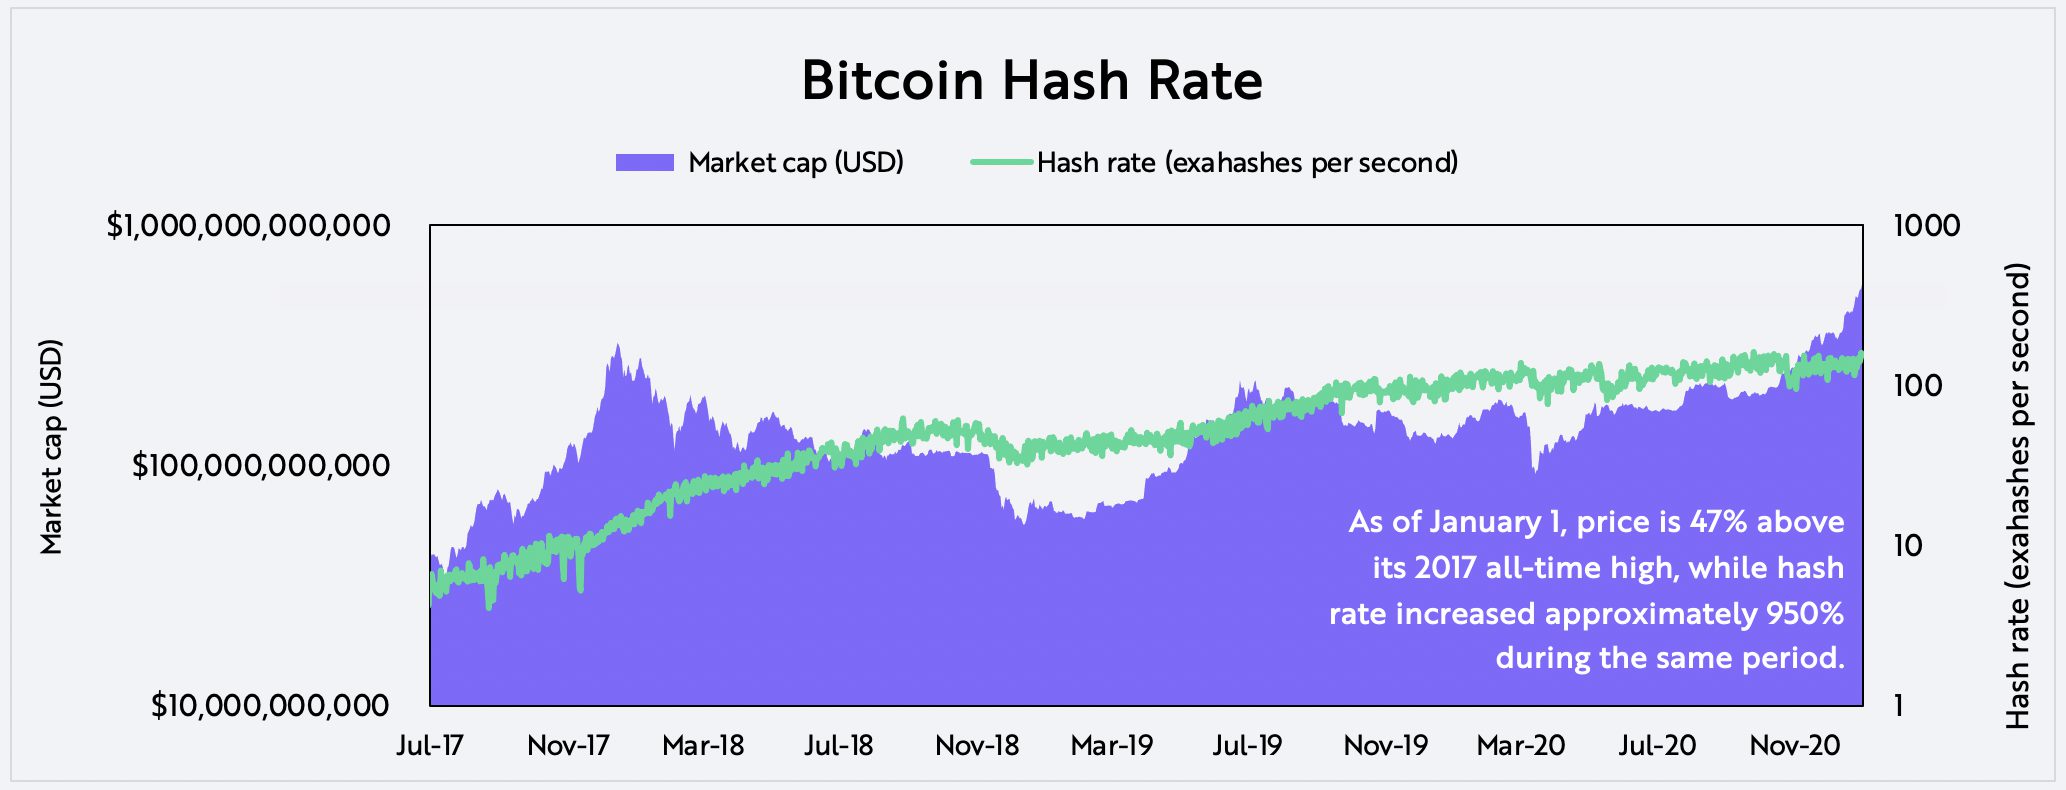 Evaluating Bitcoin Hash Rate on-chain data